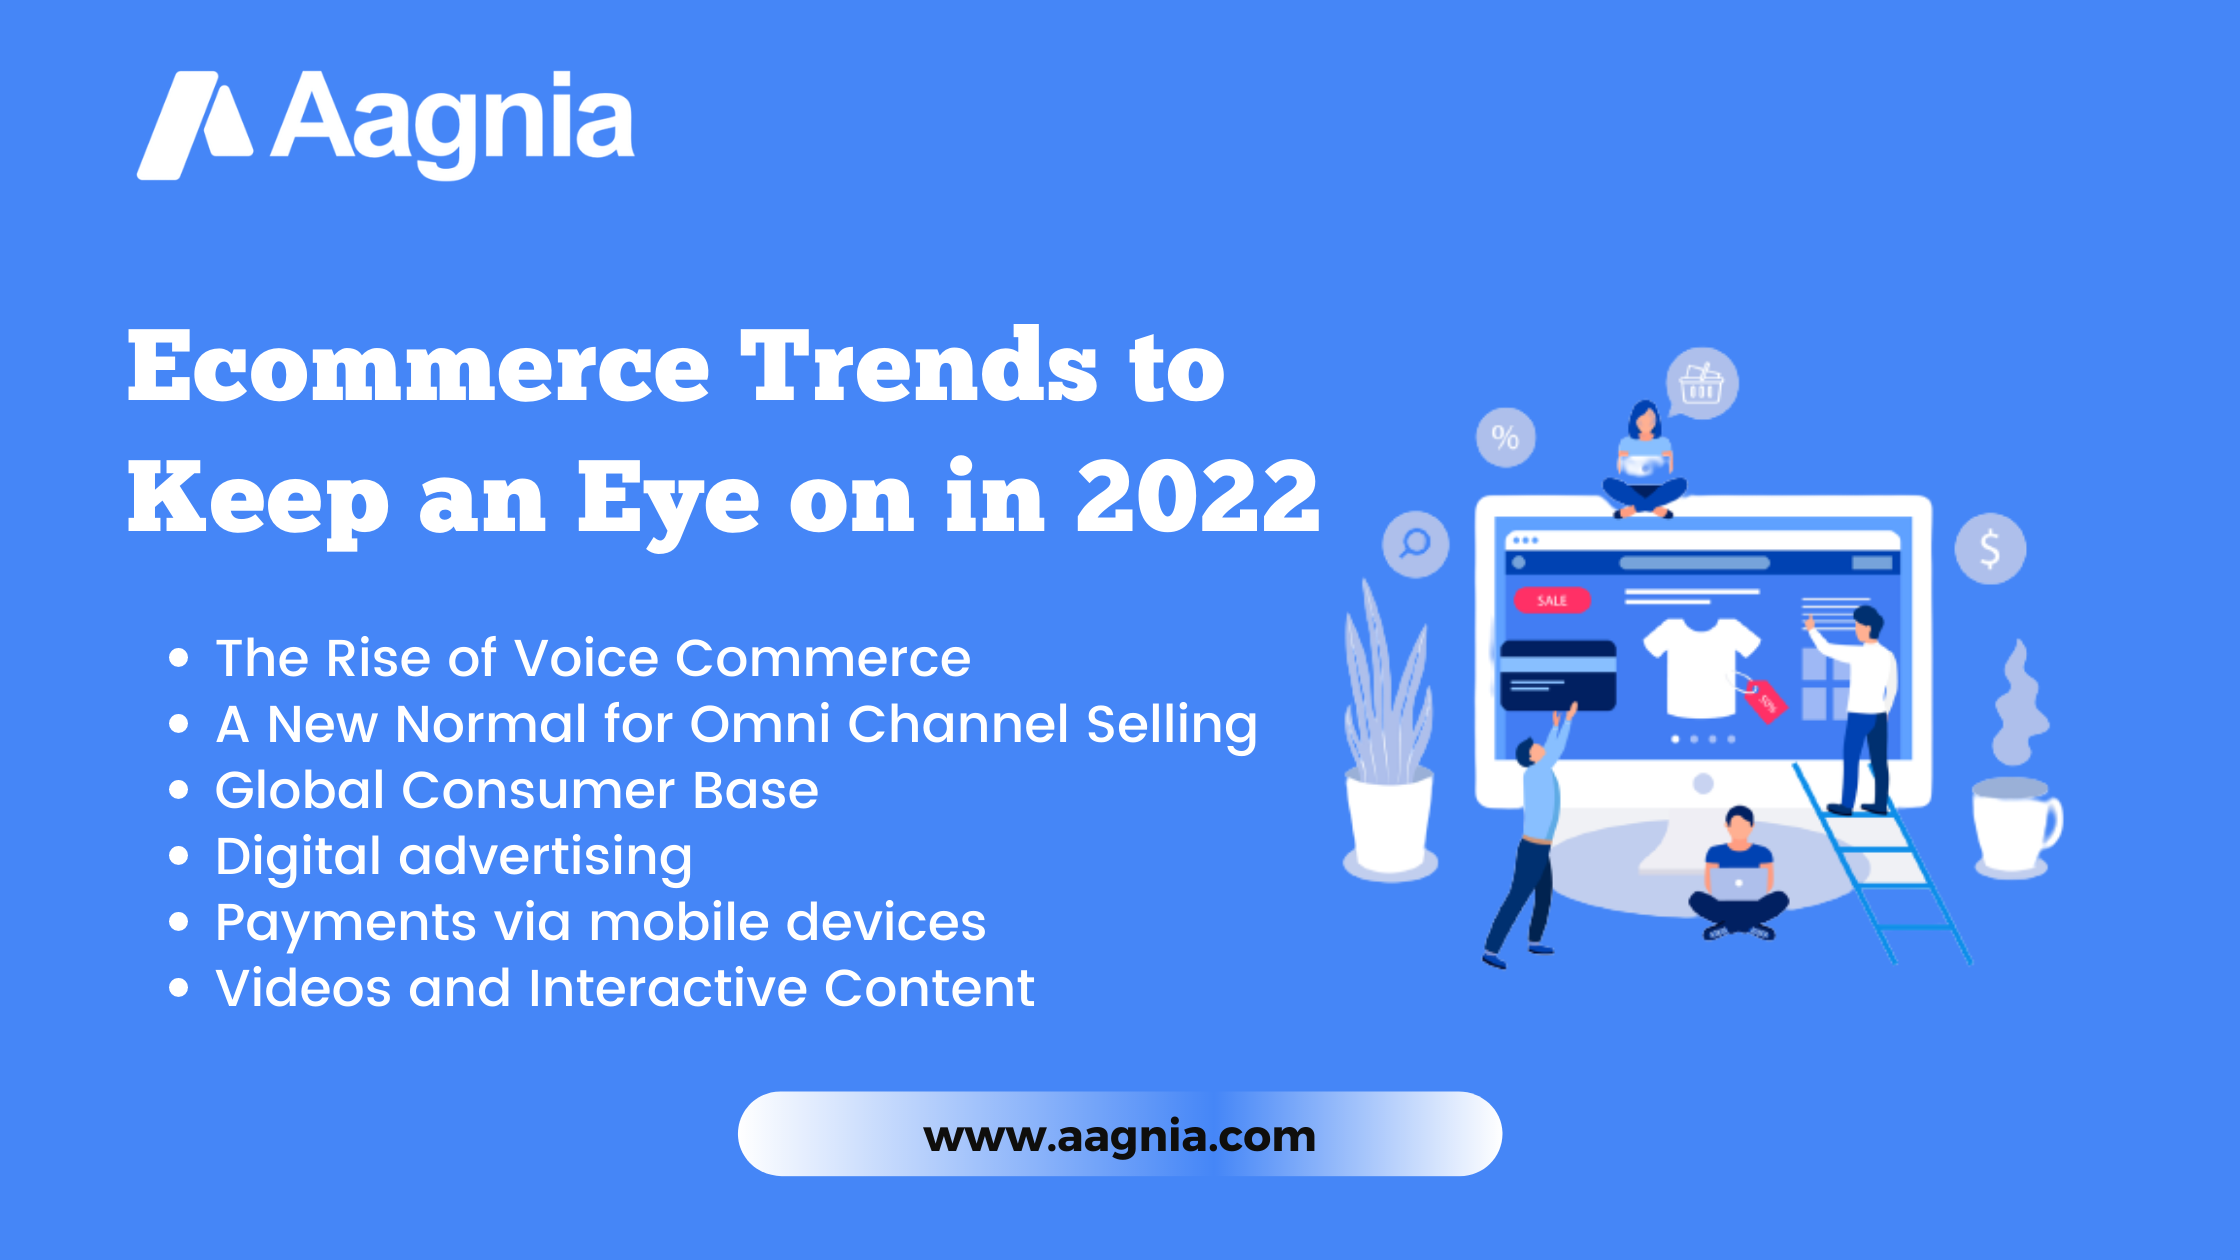 Ecommerce Trends to Keep an Eye on in 2022